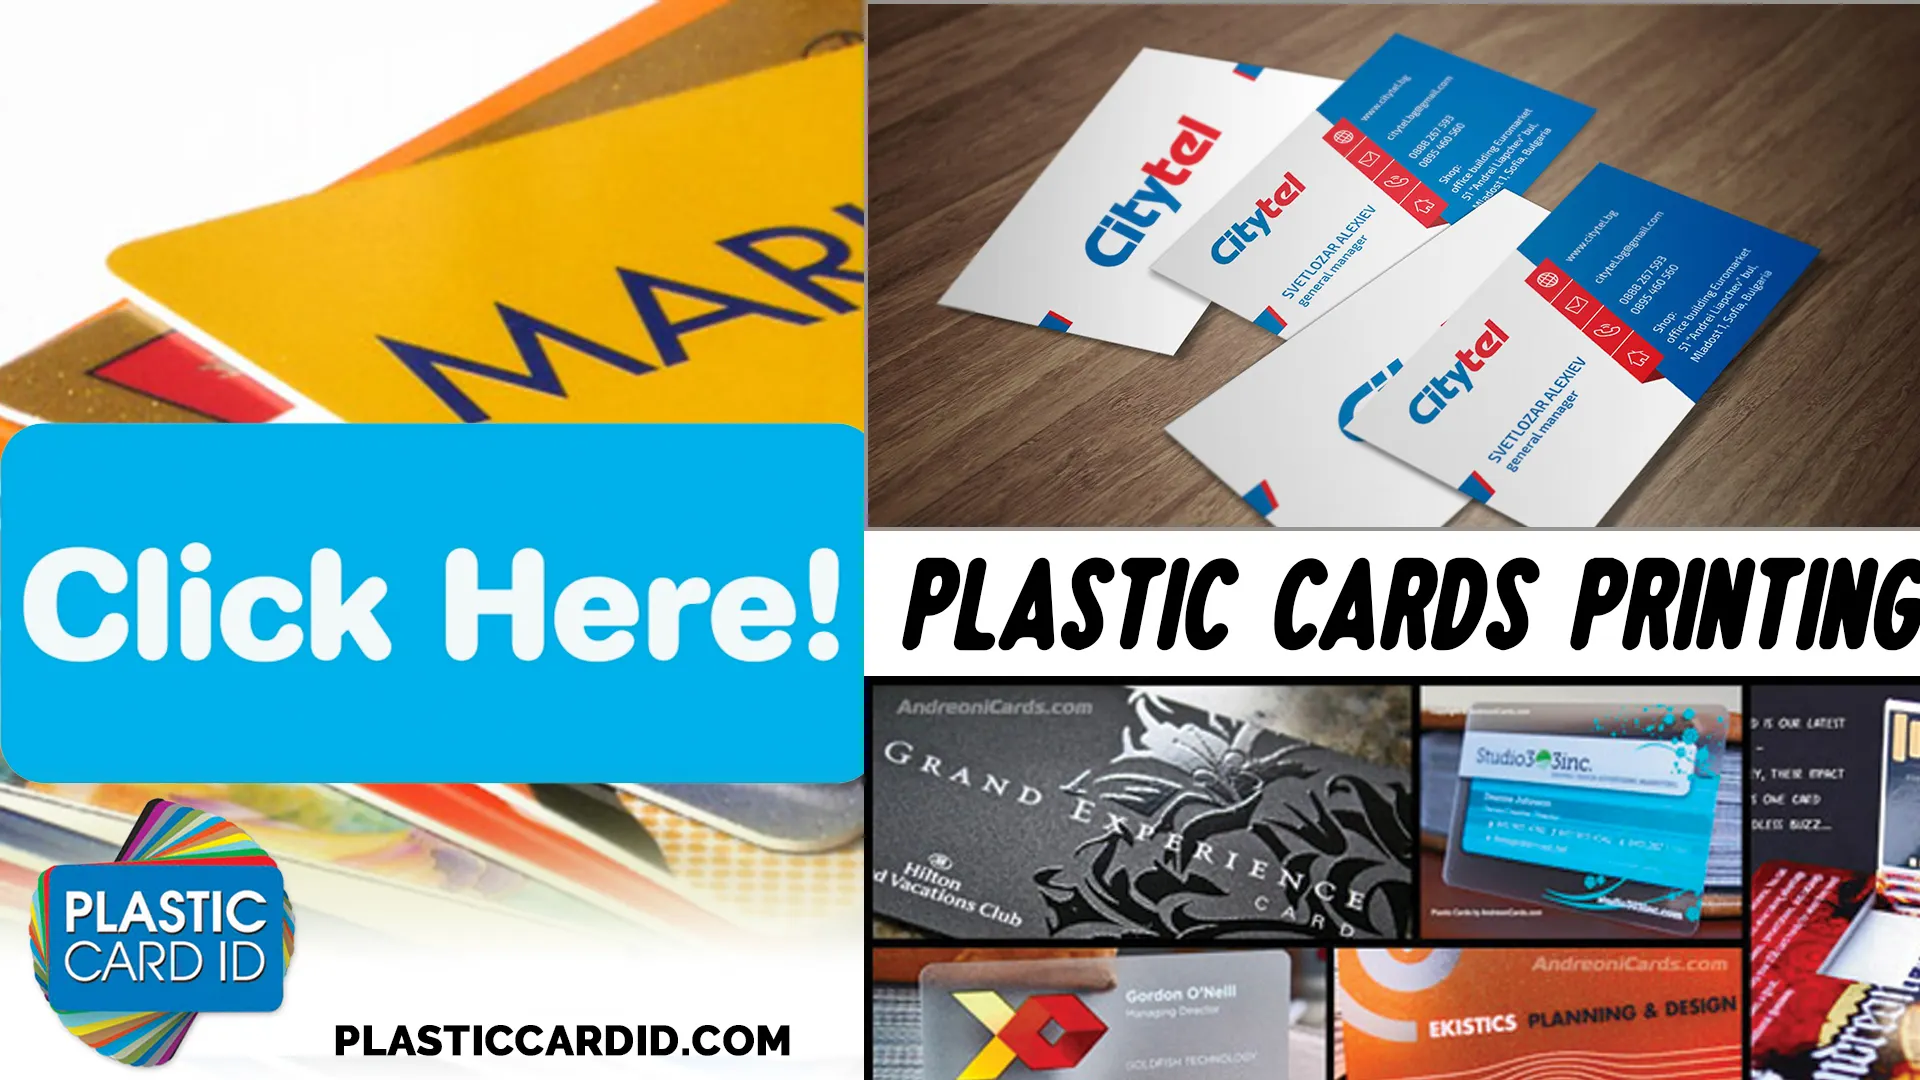 Plastic Cards: A Vessel for Valuable Consumer Data